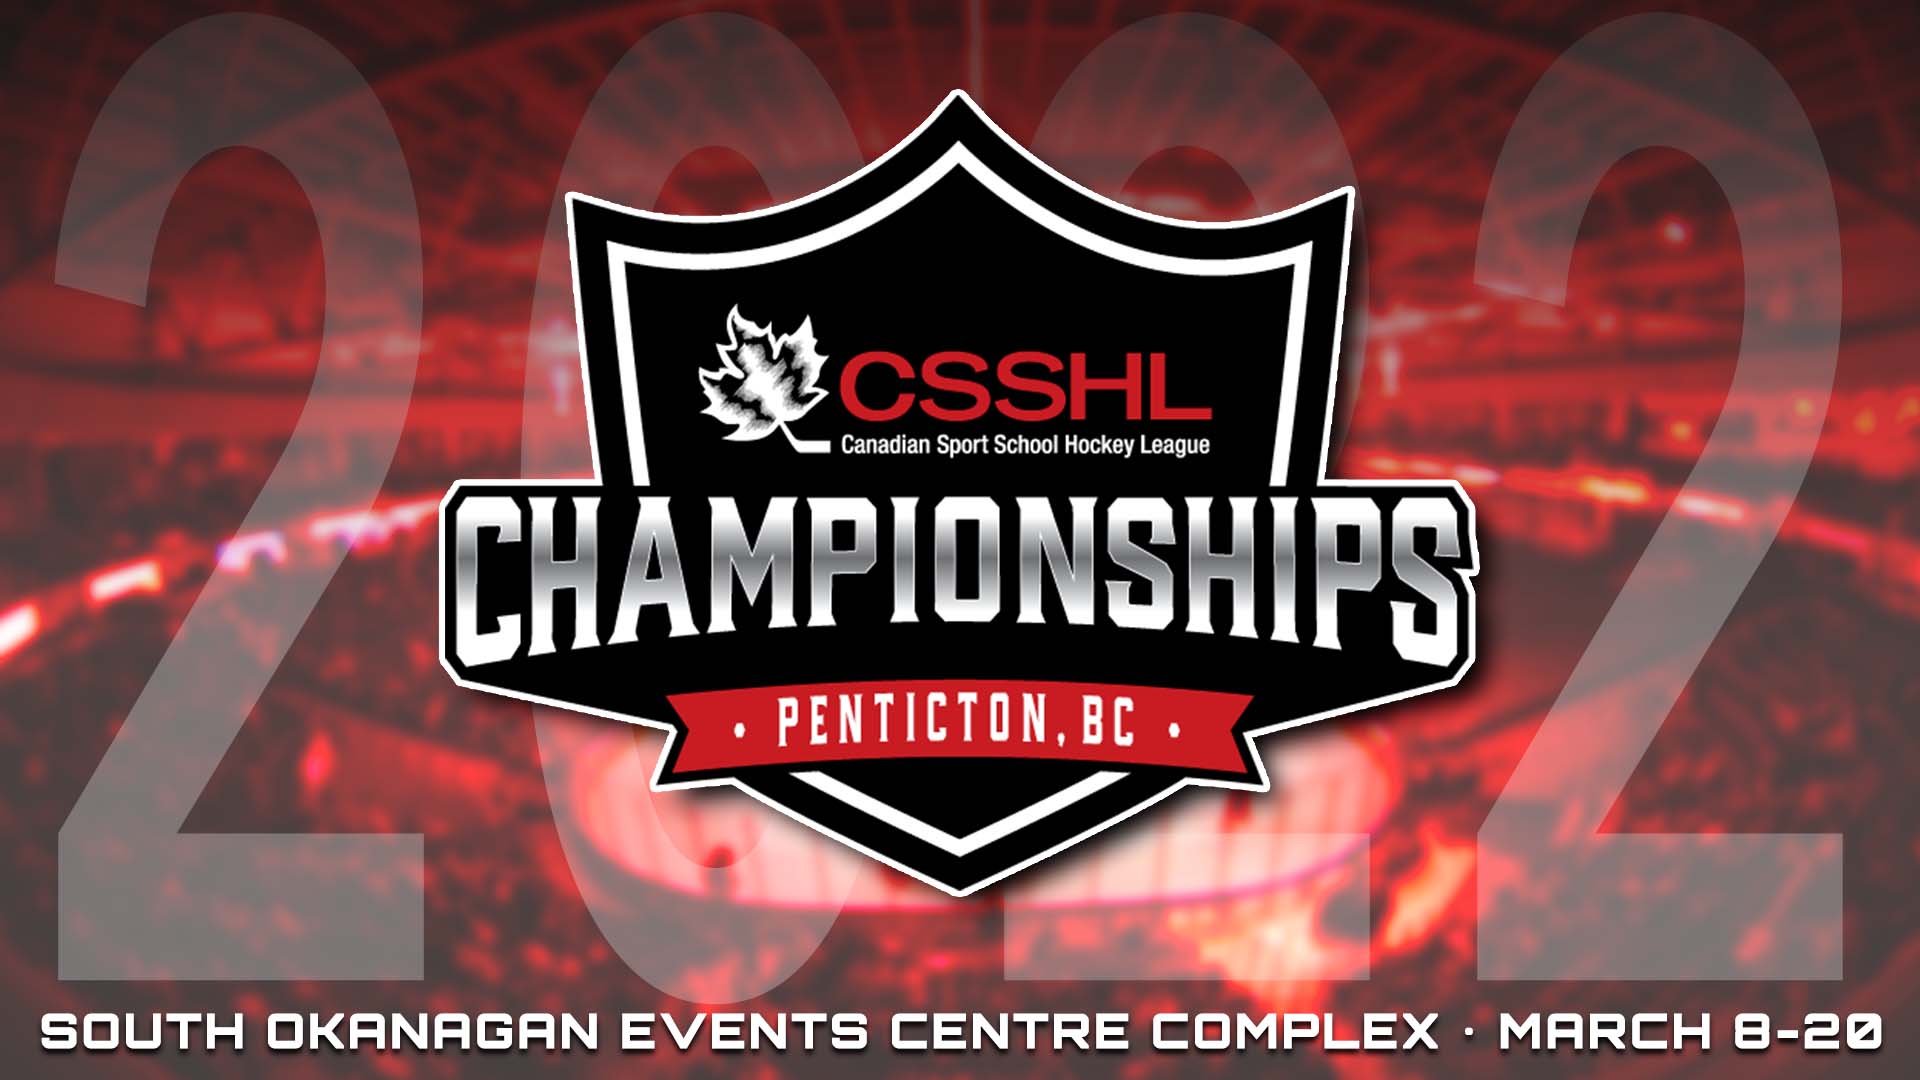 CSSHL Western Championships Returning To South Okanagan This March ...